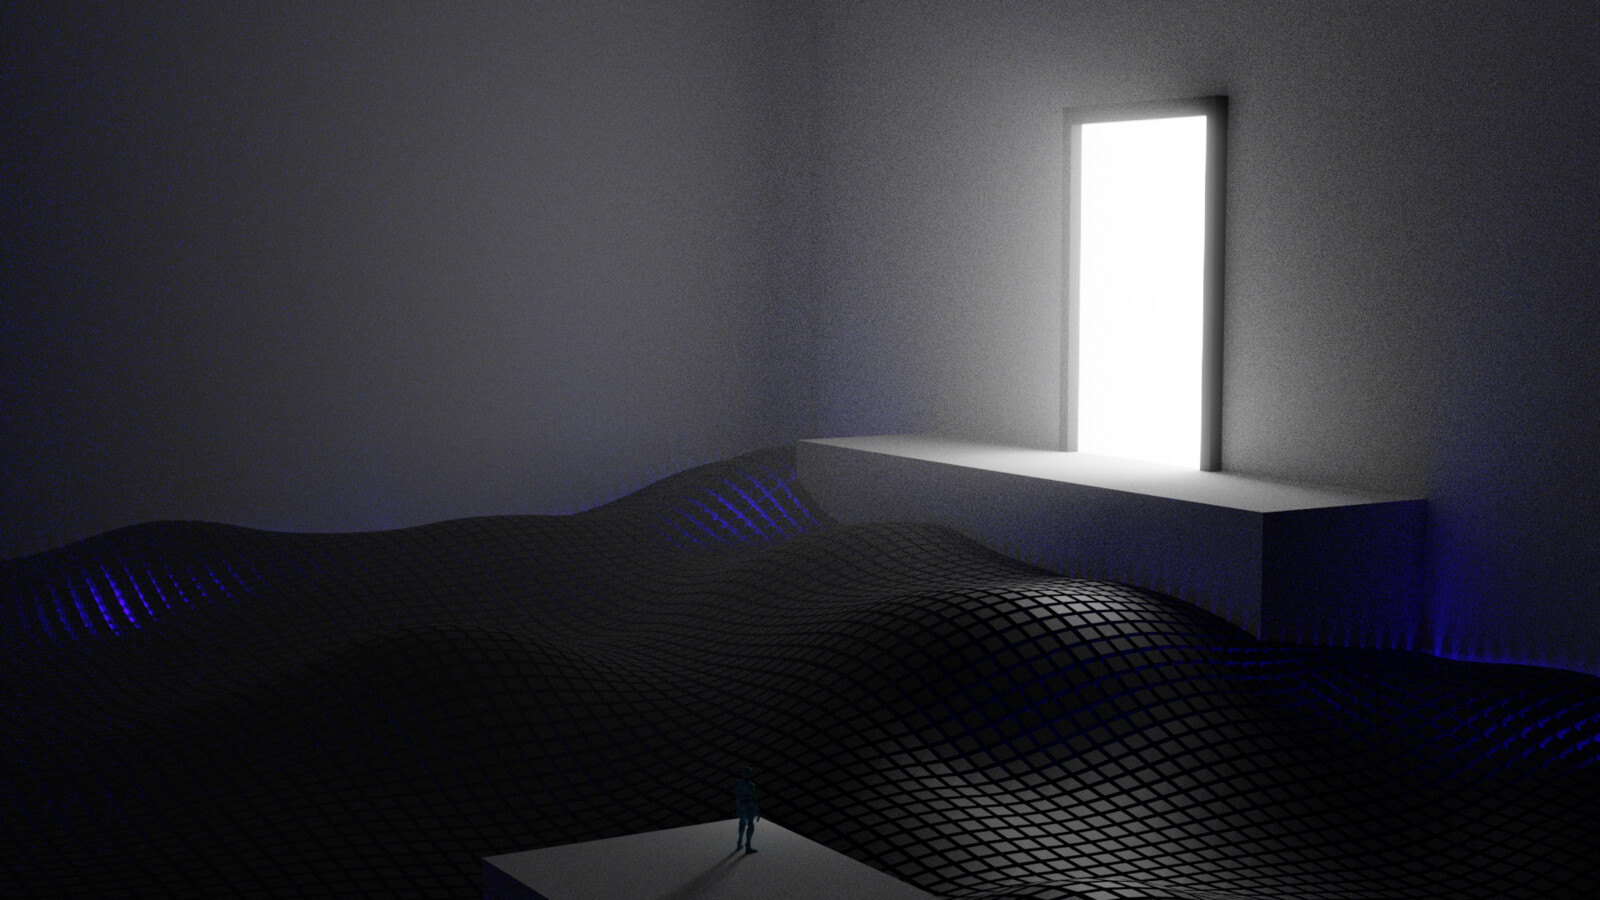 This rendered at 1224 Samples